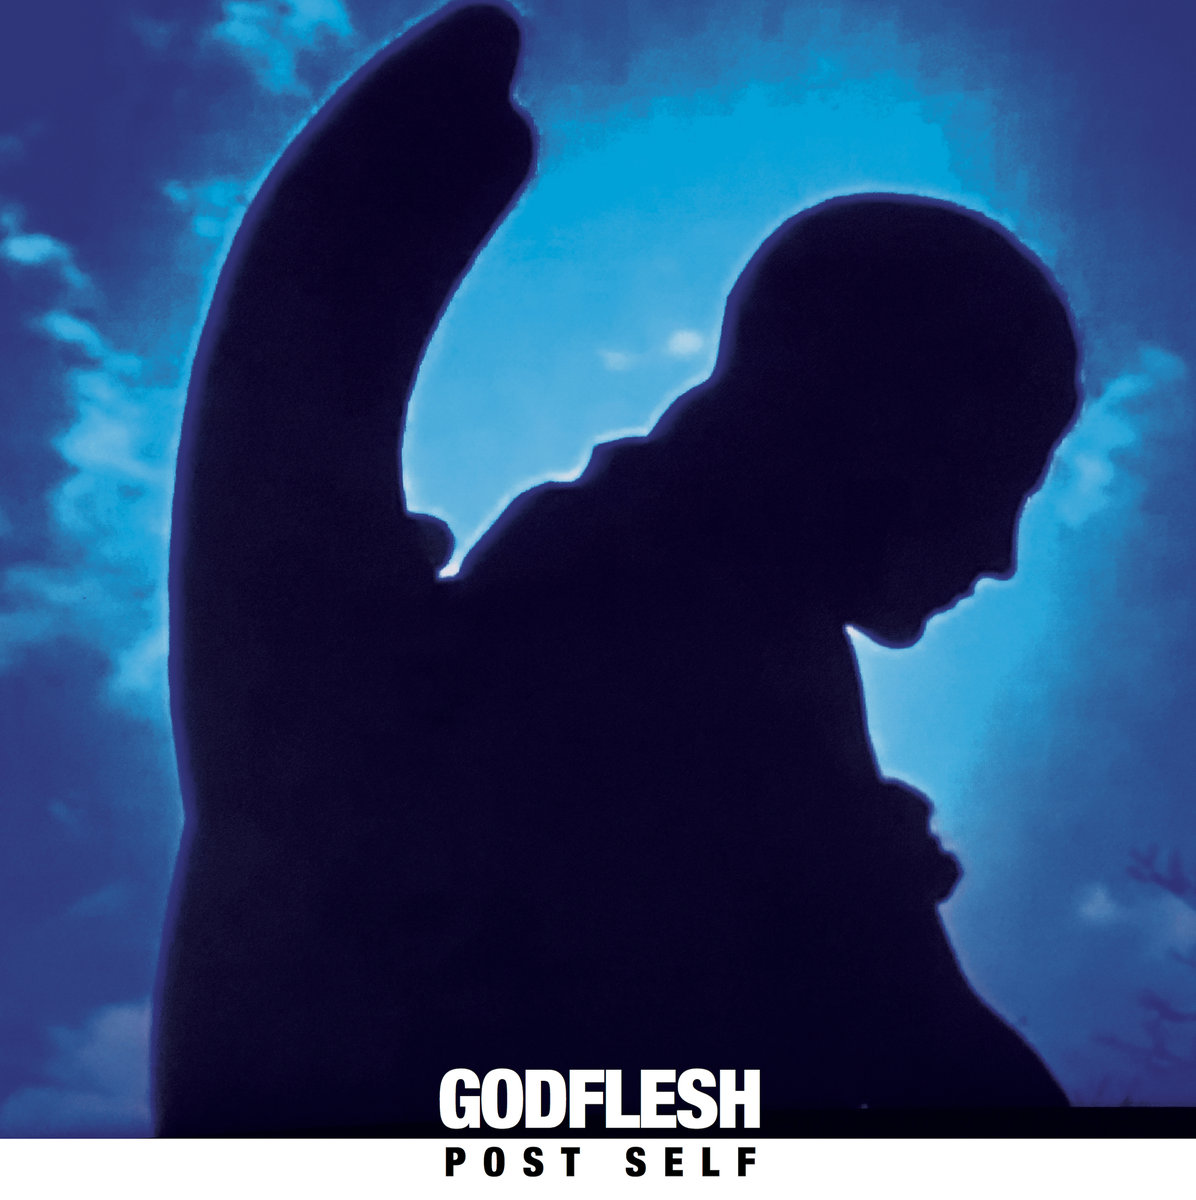 Review of 'Post Self', the new full-length by legendary UK industrial/punk project Godflesh